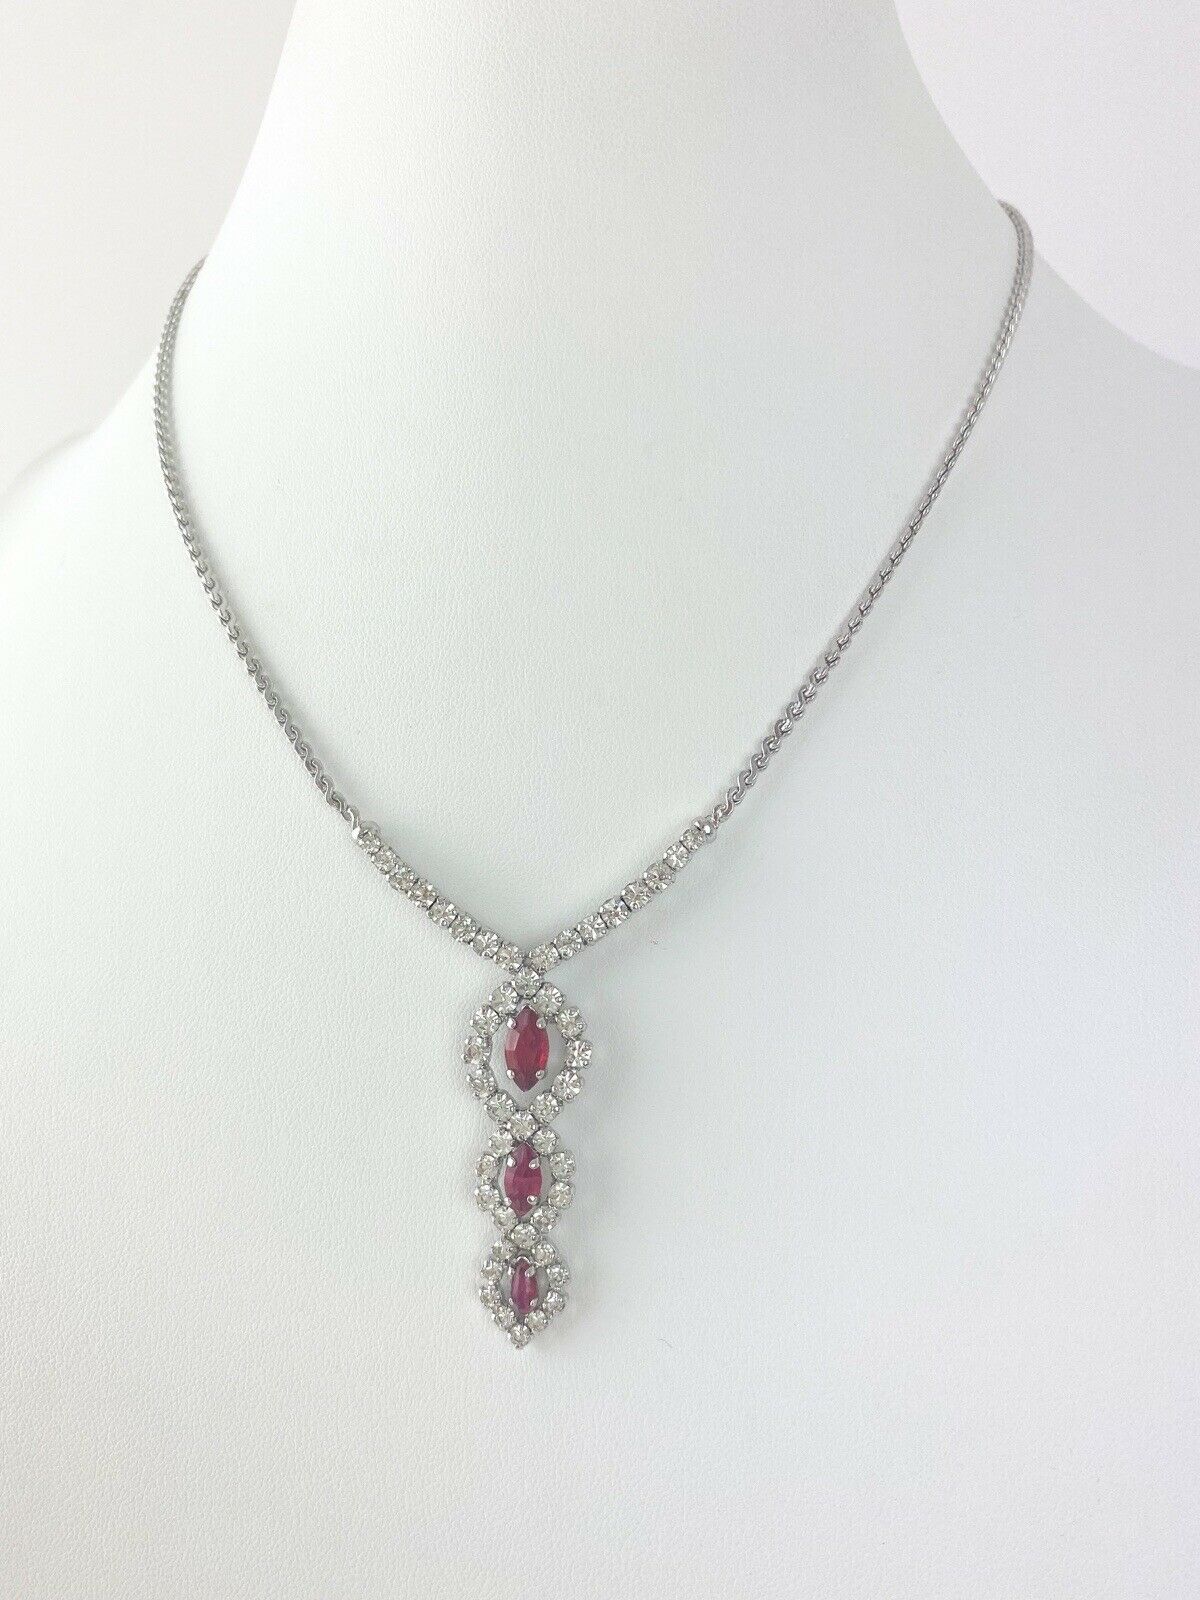 Christian Dior Germany Silver Tone Vintage Choker Necklace Crystal Ruby